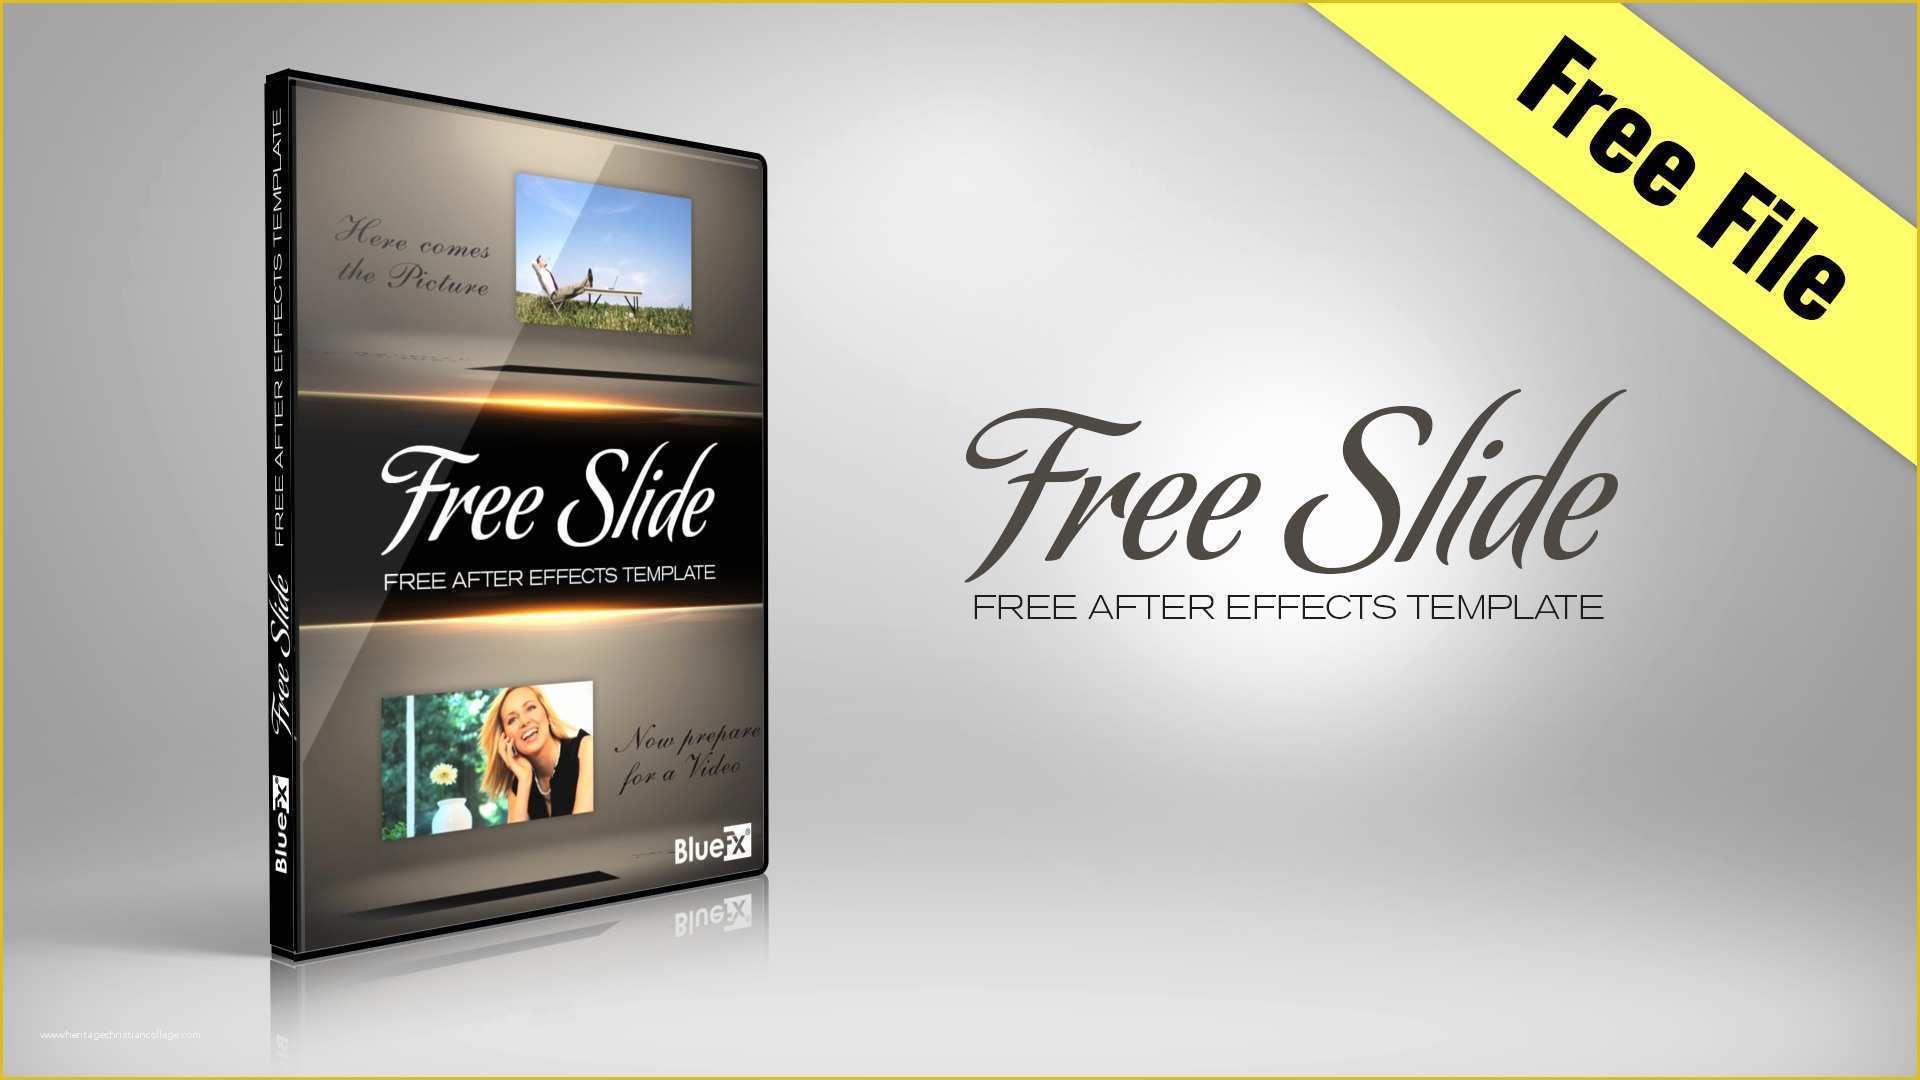 Adobe after Effects Photo Slideshow Template Free Download Of after